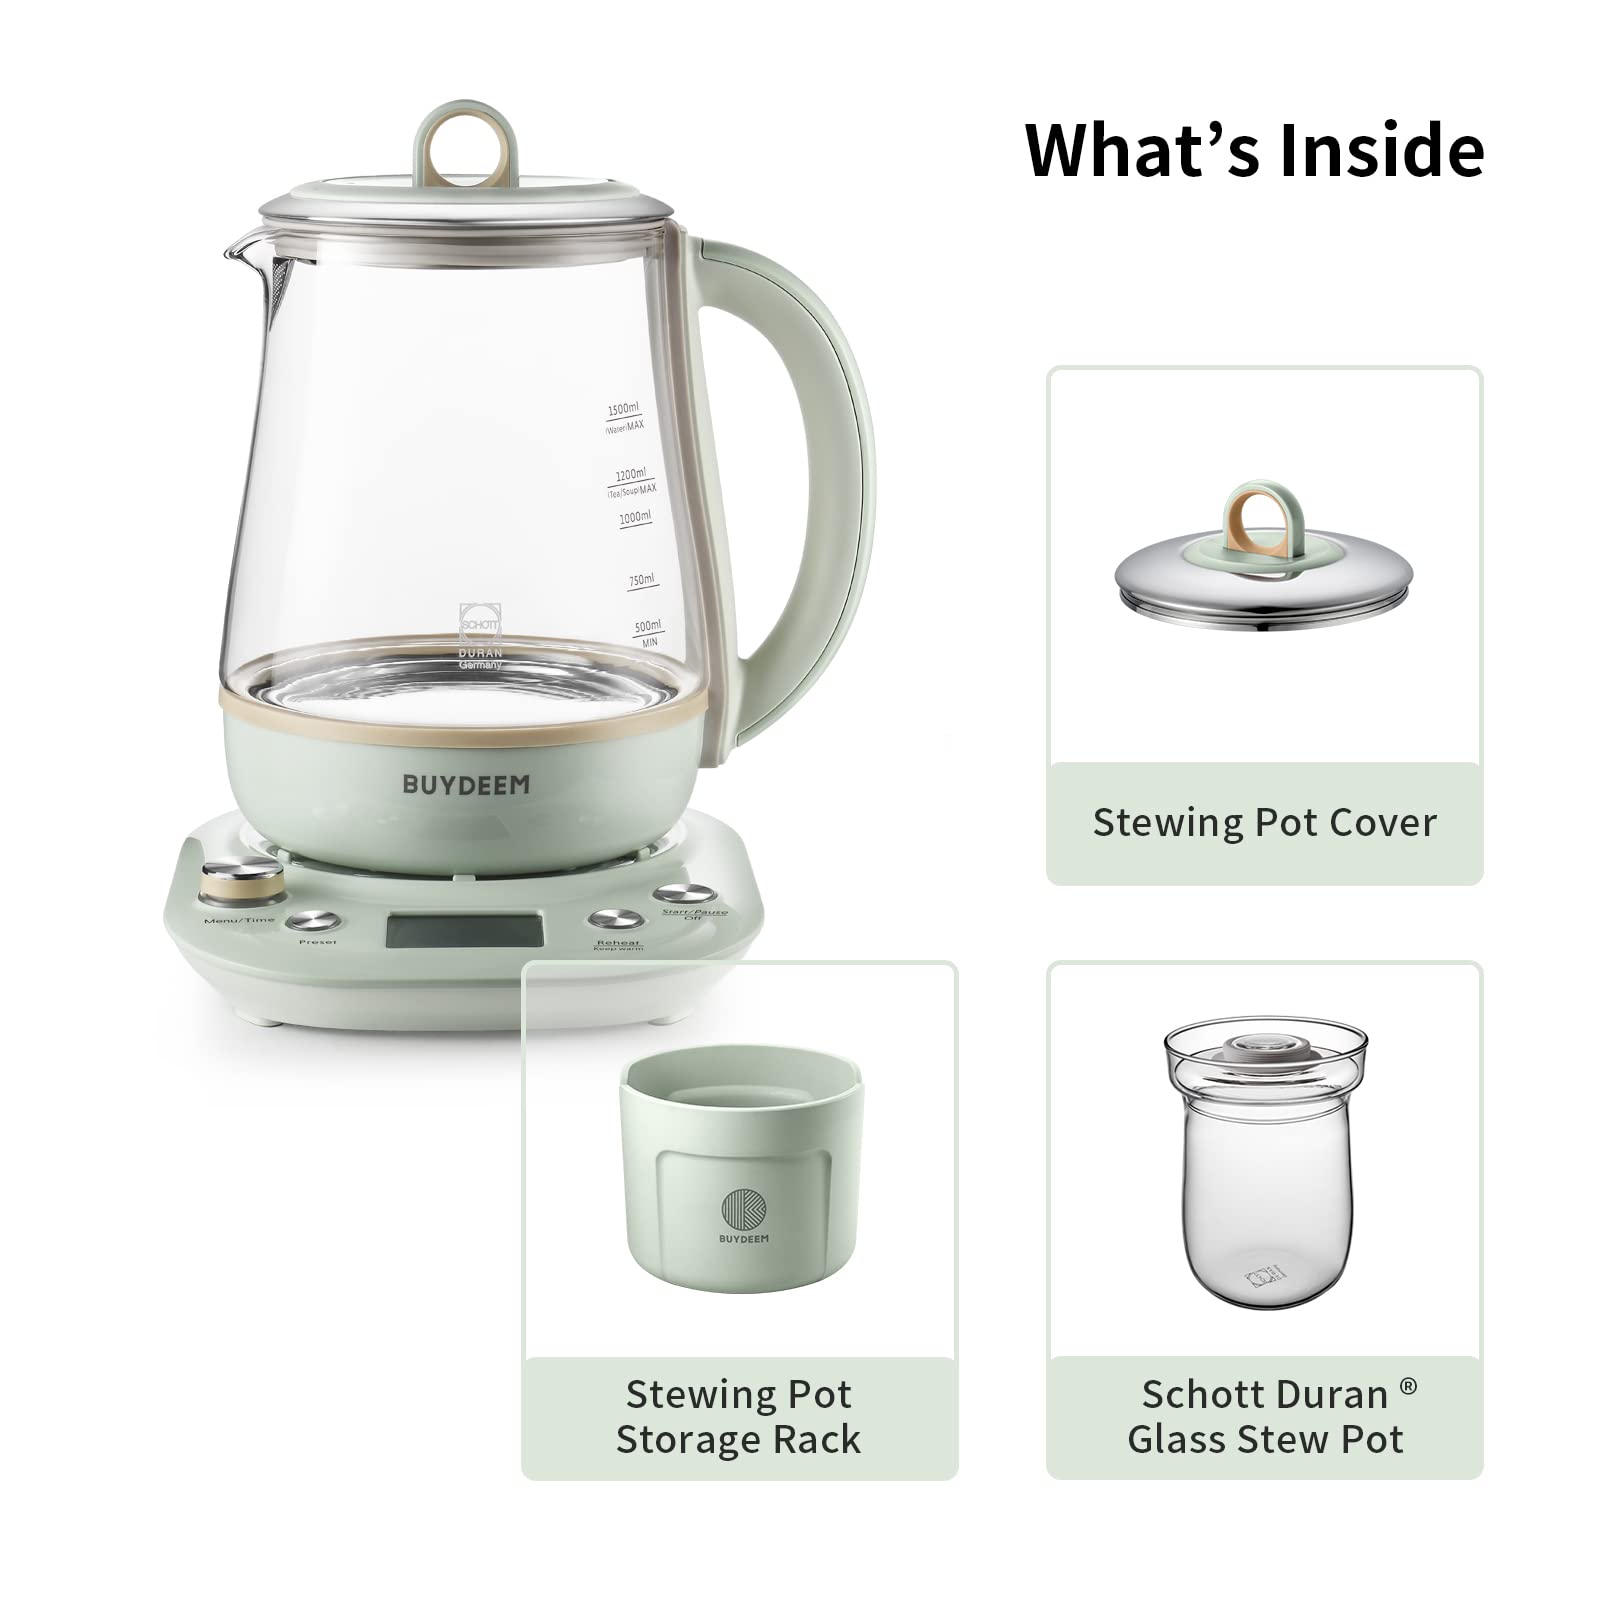 Buydeem: How to take good care of your Kettle Cooker?